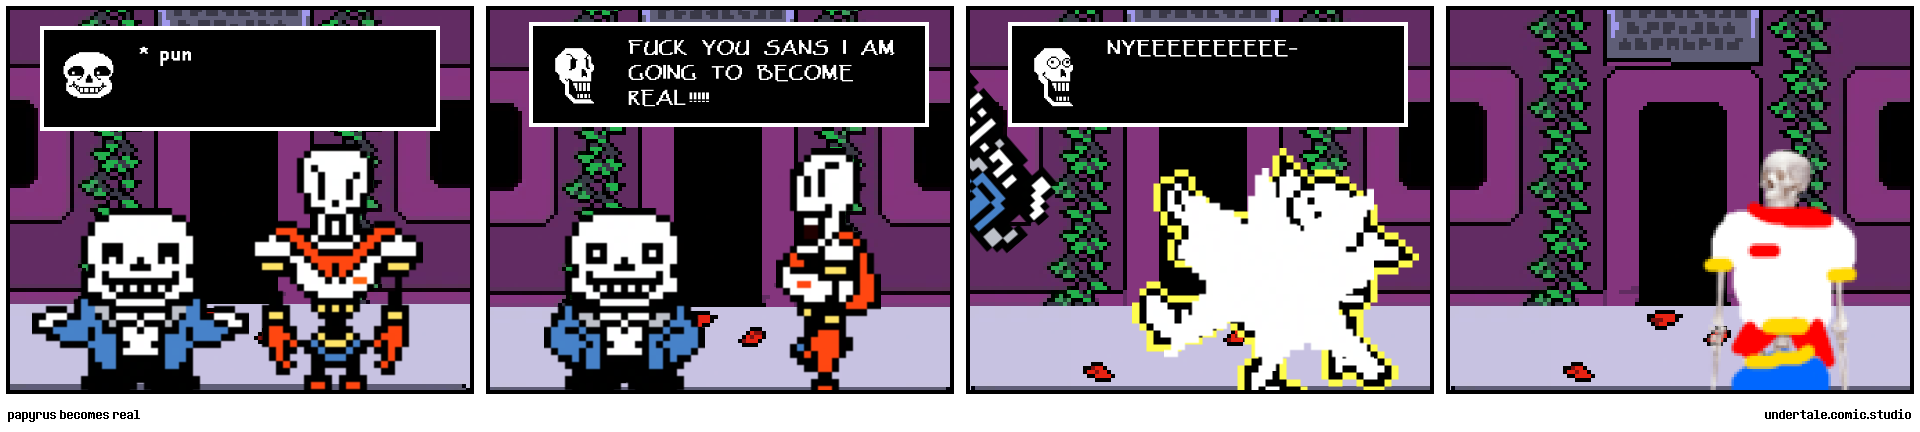 papyrus becomes real